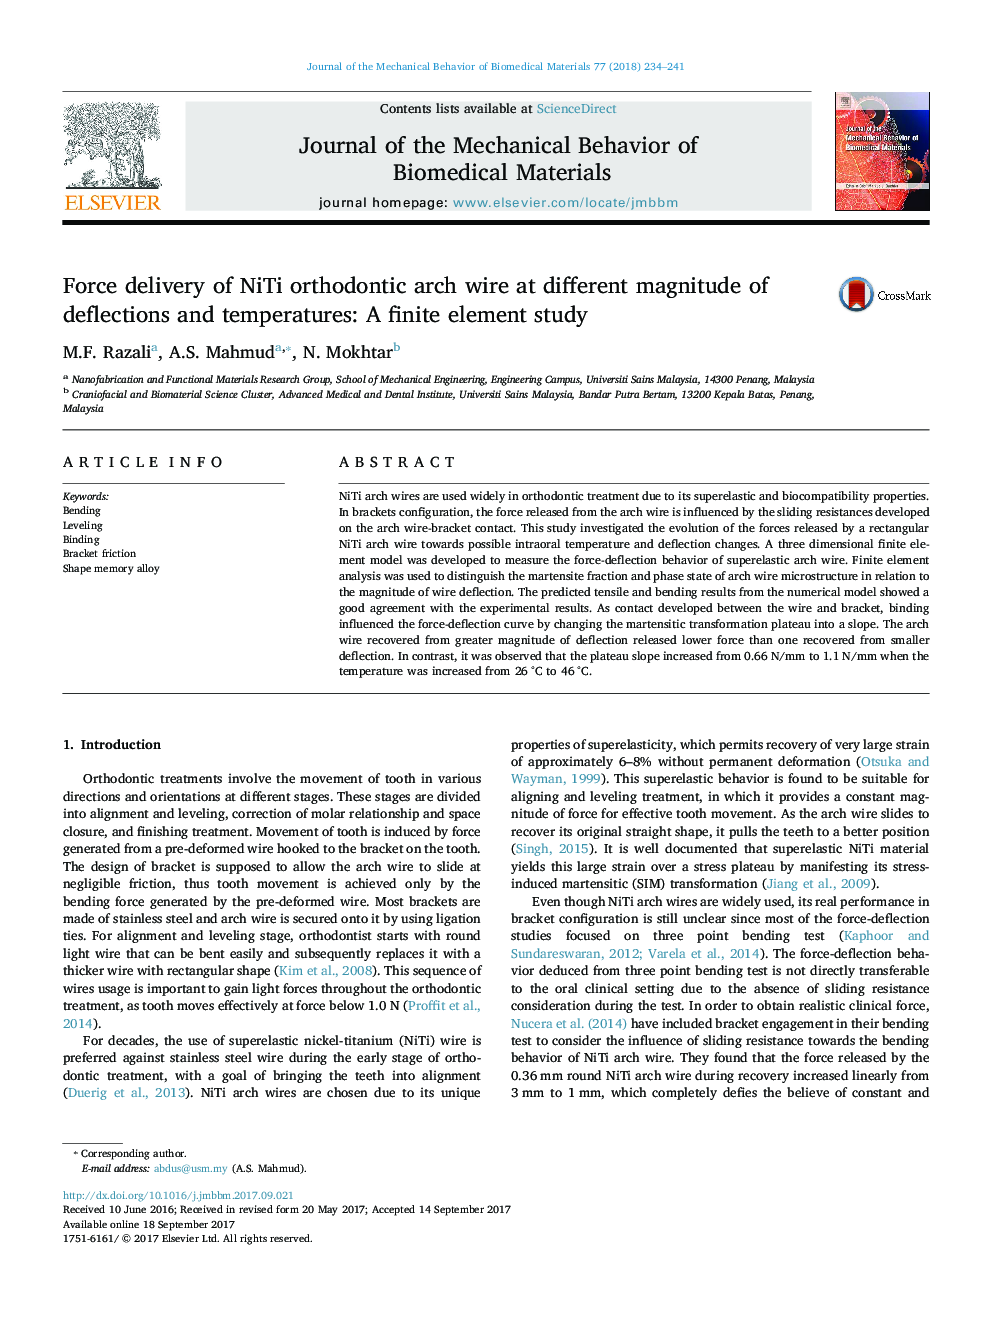 Force delivery of NiTi orthodontic arch wire at different magnitude of deflections and temperatures: A finite element study